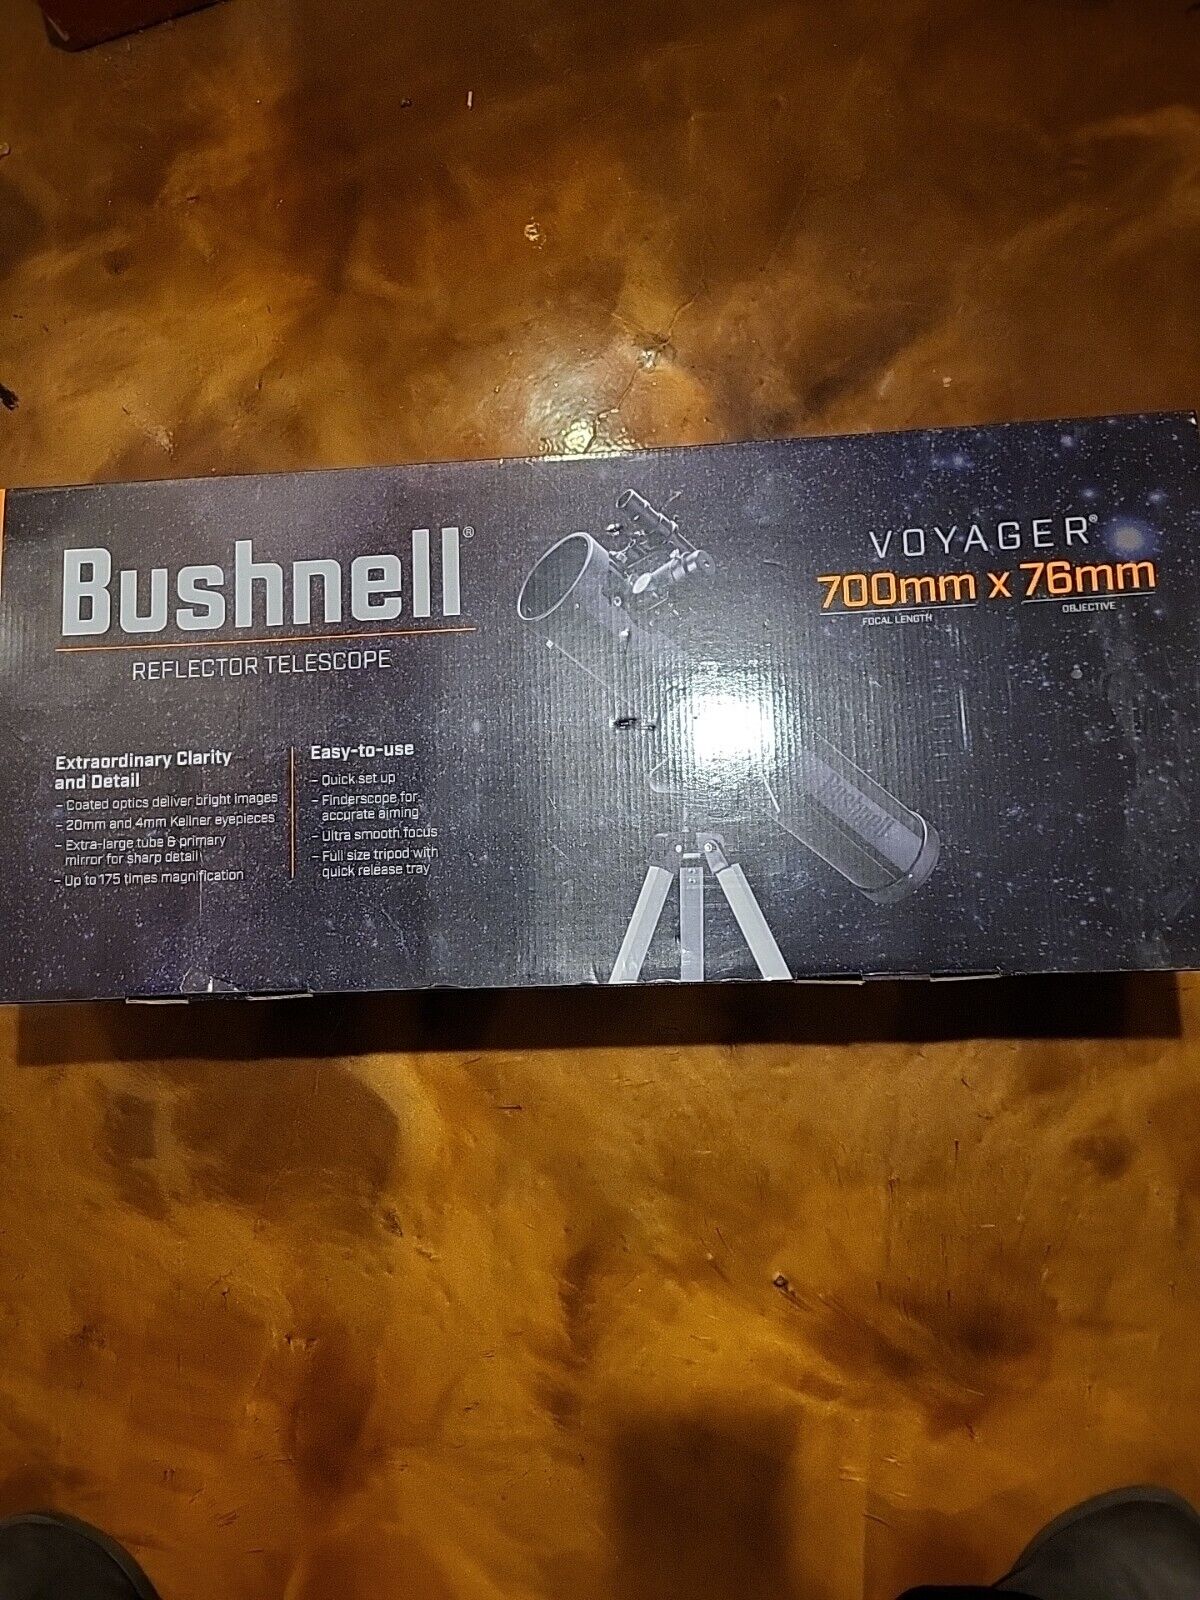 Bushnell-Voyager-Reflector-Telescope-700mm-x-76mm-78870076W